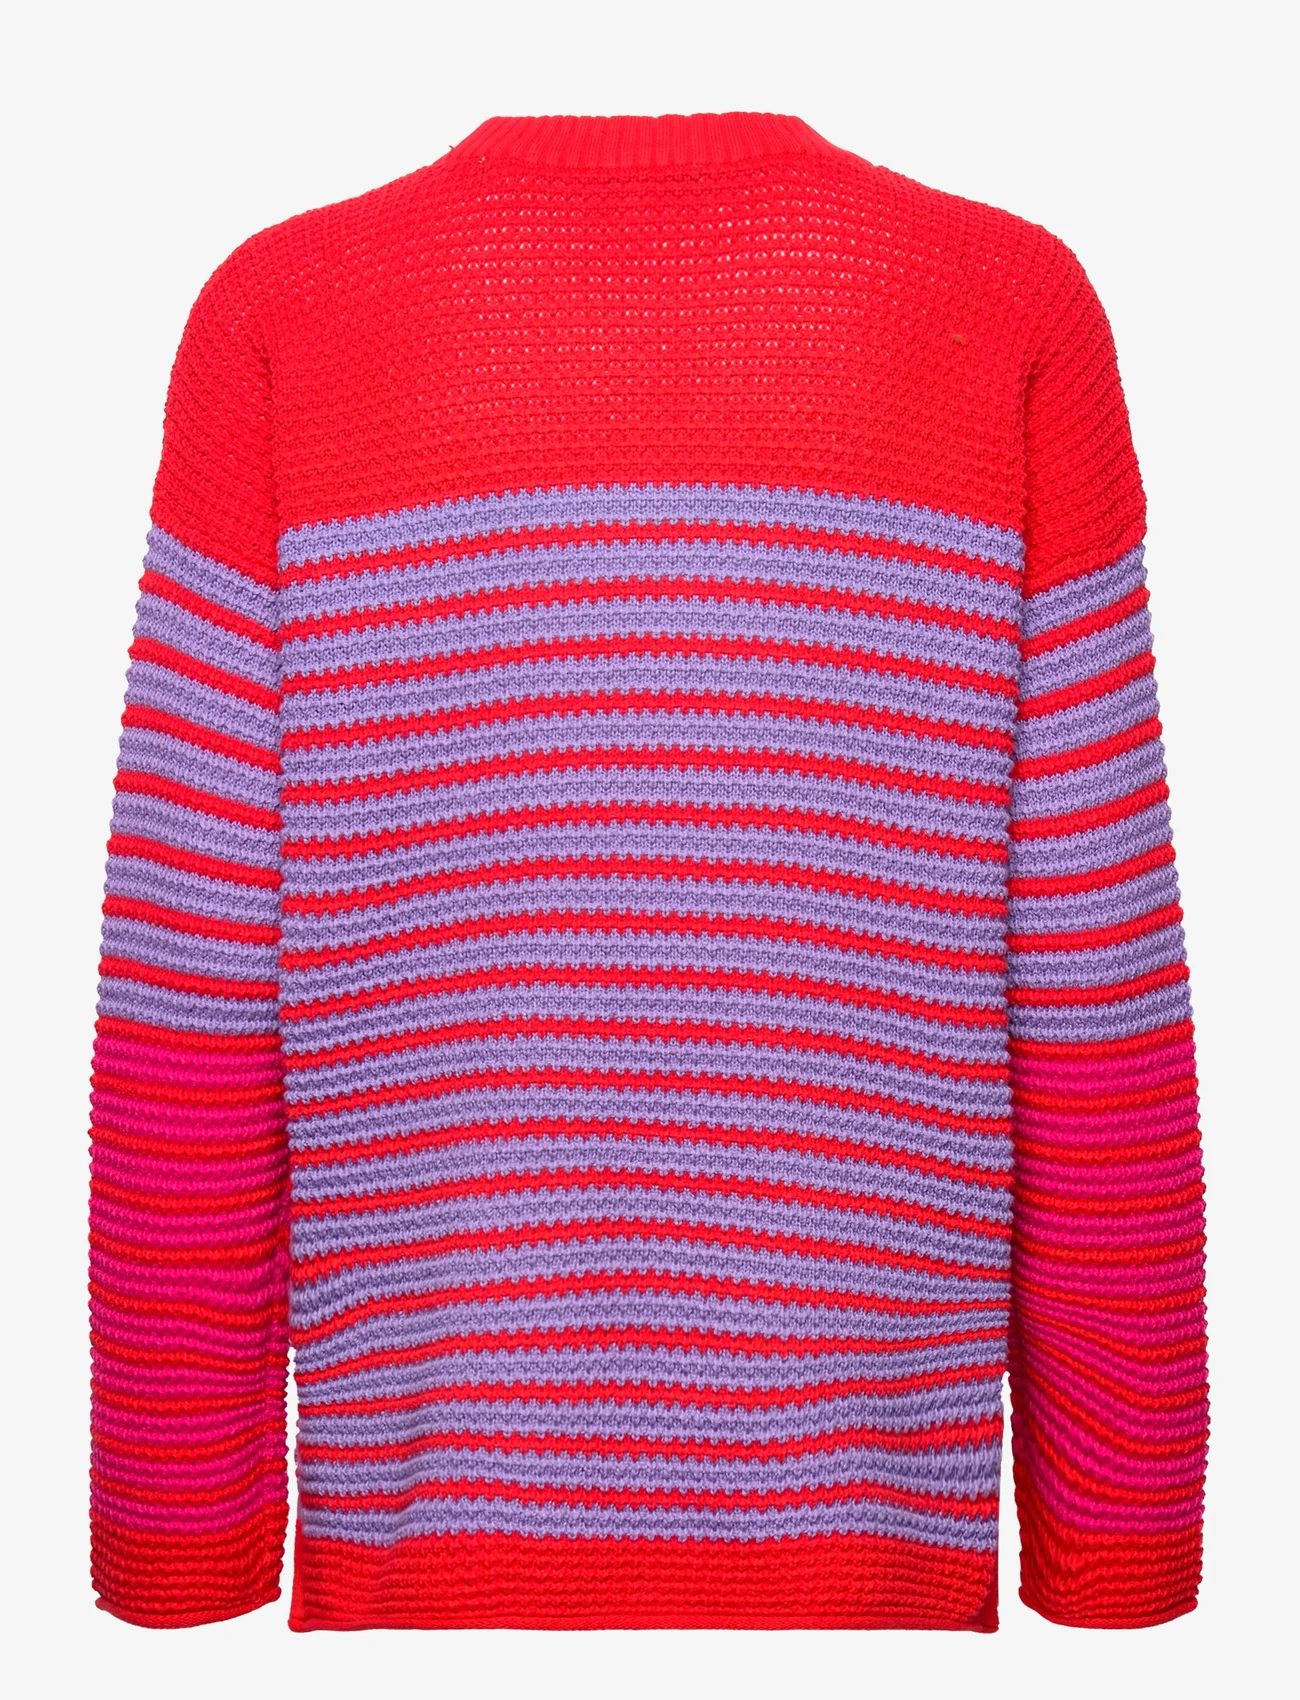 Esprit Casual - Textured knitted jumper - trøjer - red 4 - 1